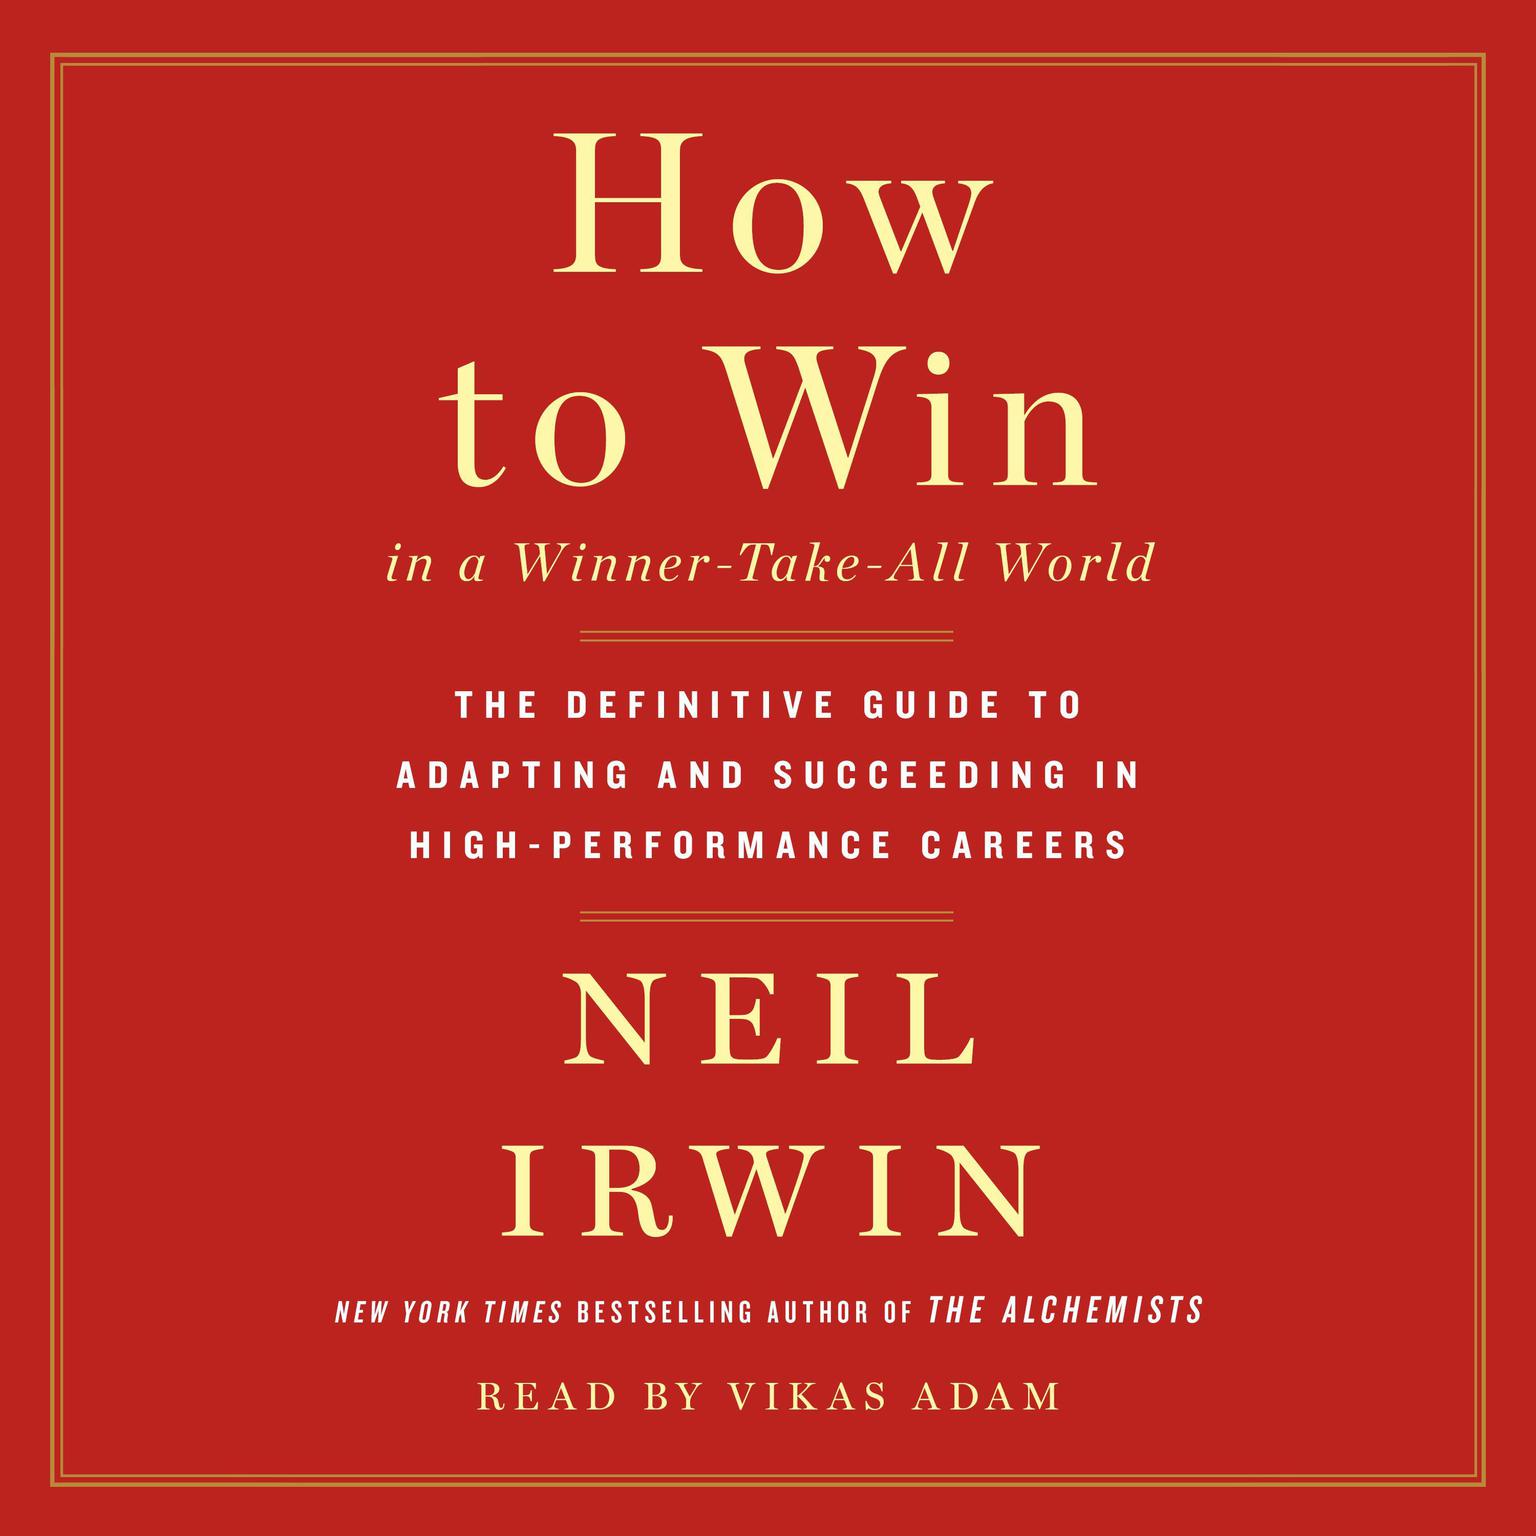 How to Win in a Winner-Take-All World: The Definitive Guide to Adapting and Succeeding in High-Performance Careers Audiobook, by Neil Irwin